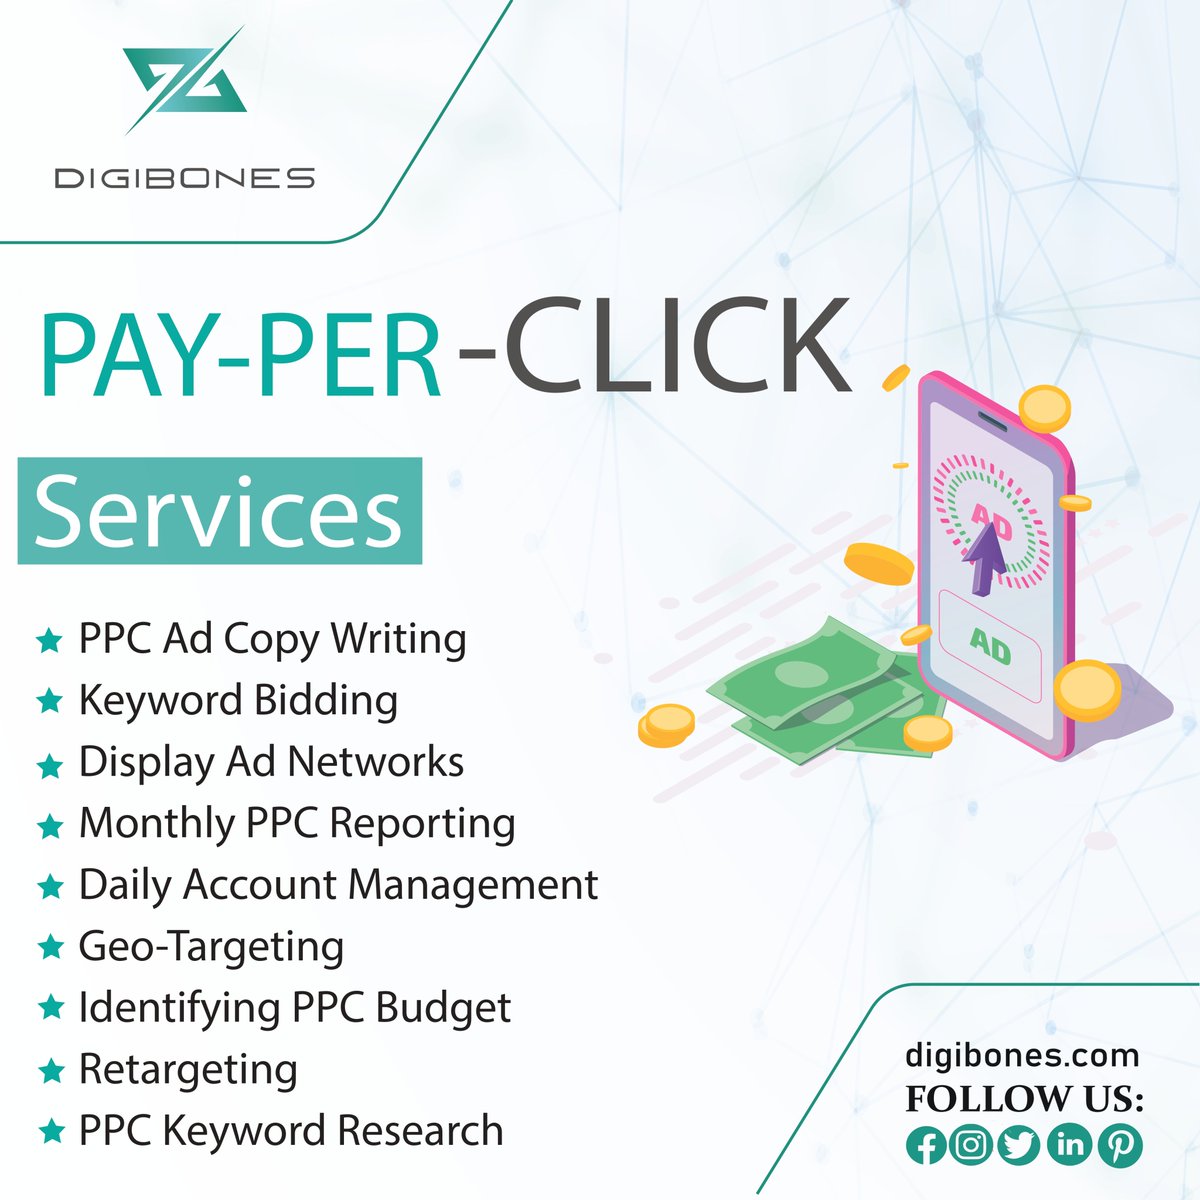 PPC Is The Most Effective Way To Grow Your Business Online. Get Your Ads In Front Of Customers Who Are Looking For What You Offer.
digibones.com
 #digibones #softwarecompany #PPC #payperclick #payperclickads #payperclickcampaign #PayPerClickServices #adwordsexpert